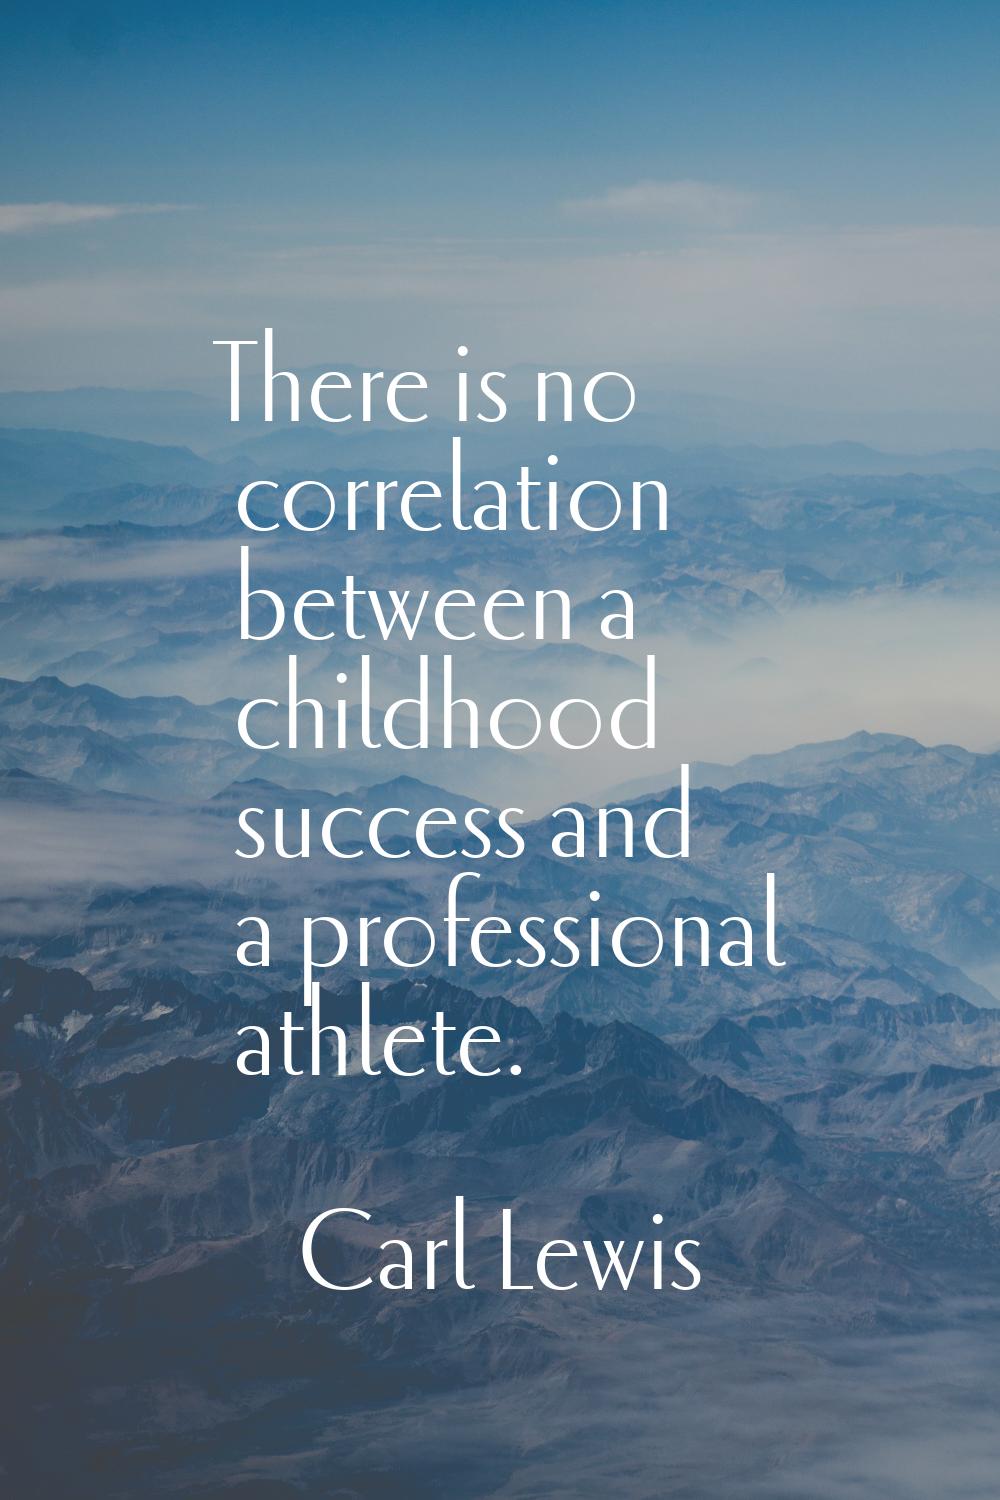 There is no correlation between a childhood success and a professional athlete.